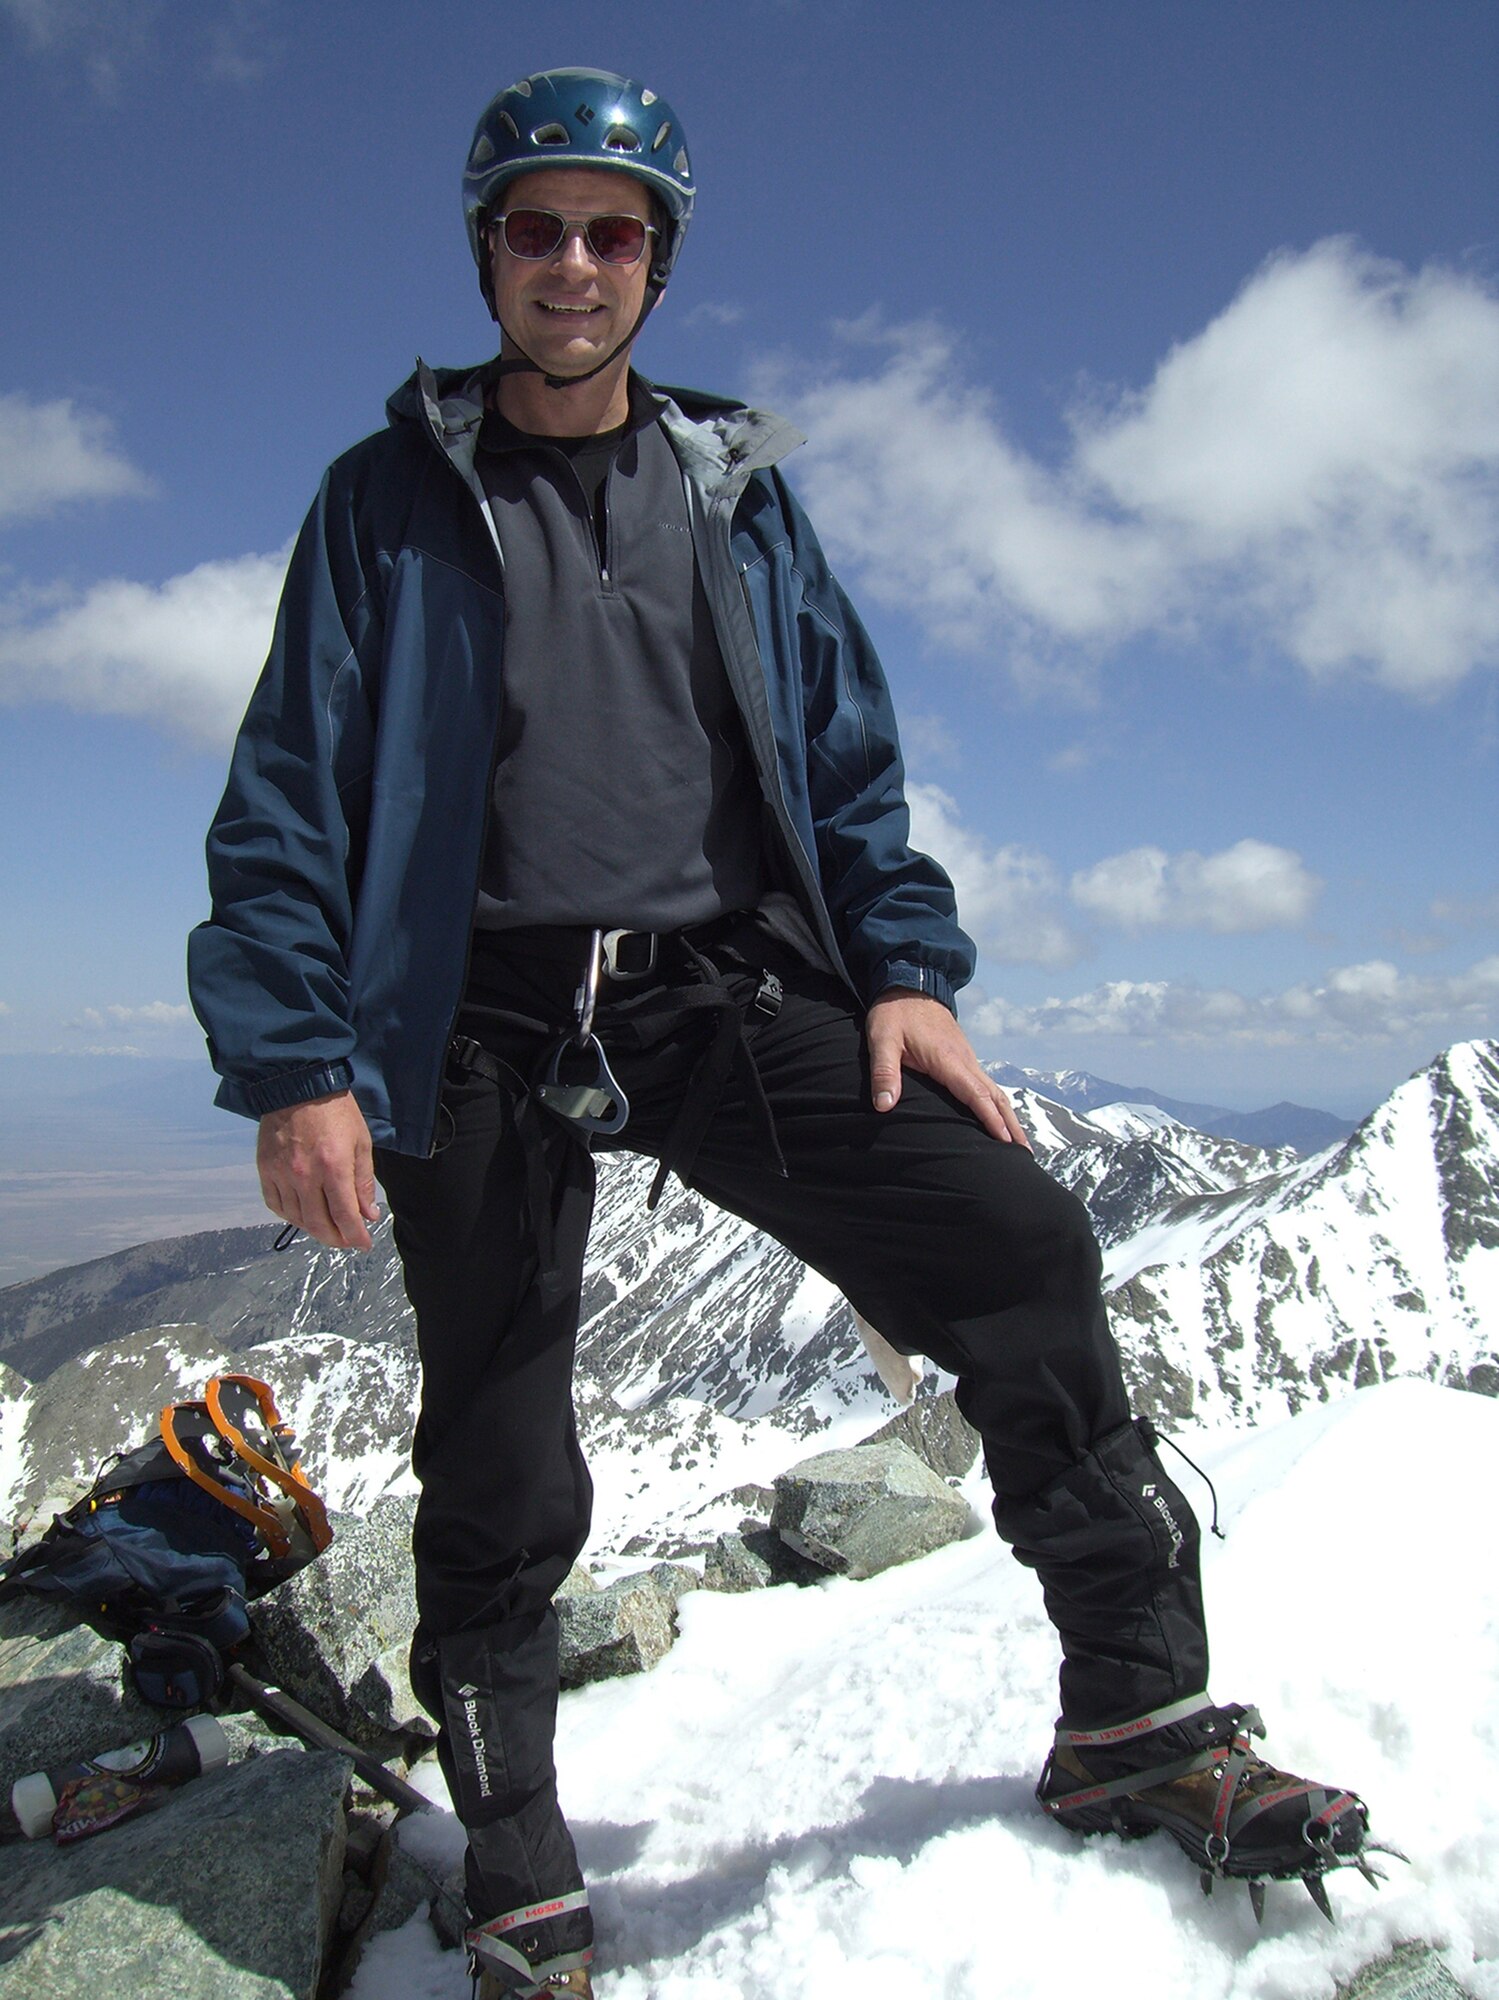 Colonel Vanderwerf seen at the top of this peak in the Sangre de Cristo Mountains of southern Colorado, said temperatures in winter climbs can reach 15 degrees below zero and 30 to 40 below zero with windchill. Only experienced climbers should attempt technical snow climbing, he said.  Courtesy photo